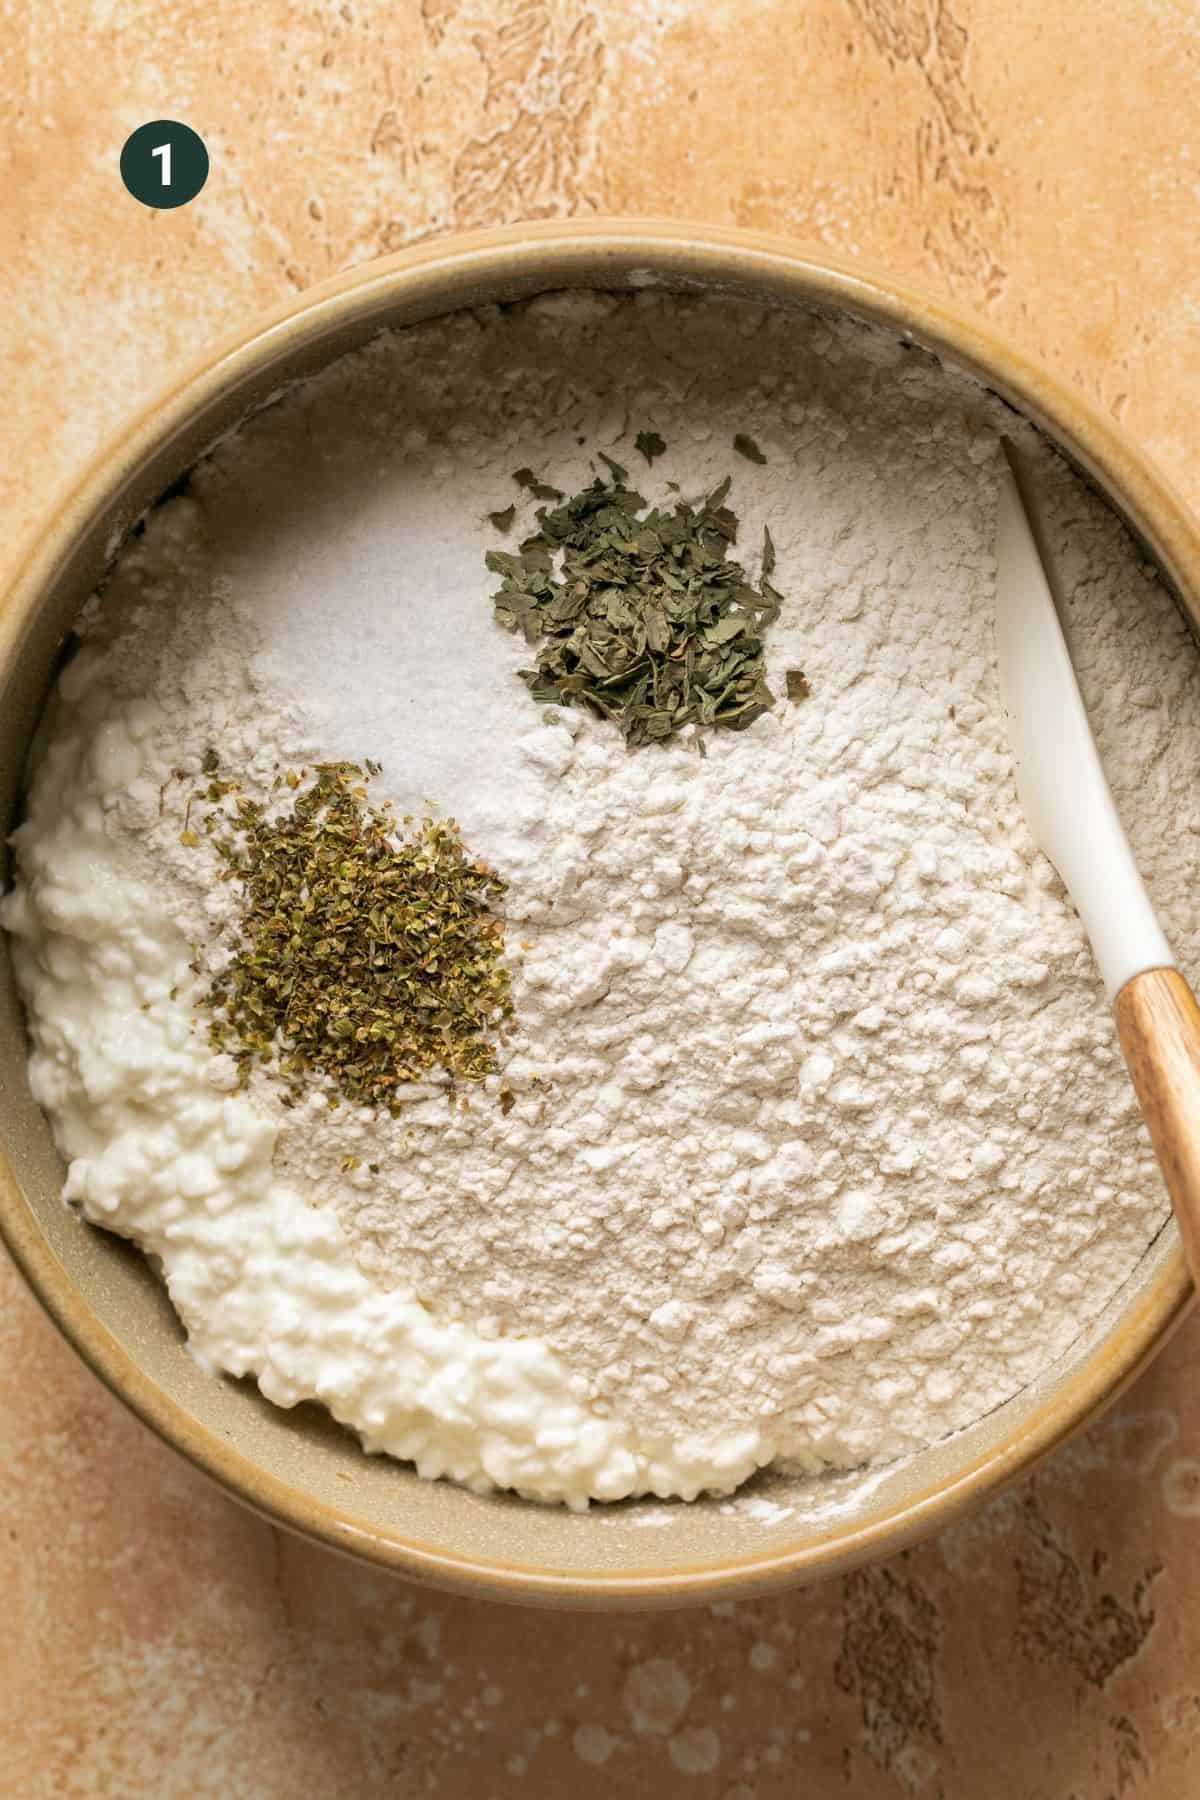 Flour, cottage cheese, salt, oregano and basil added to a bowl to combine.